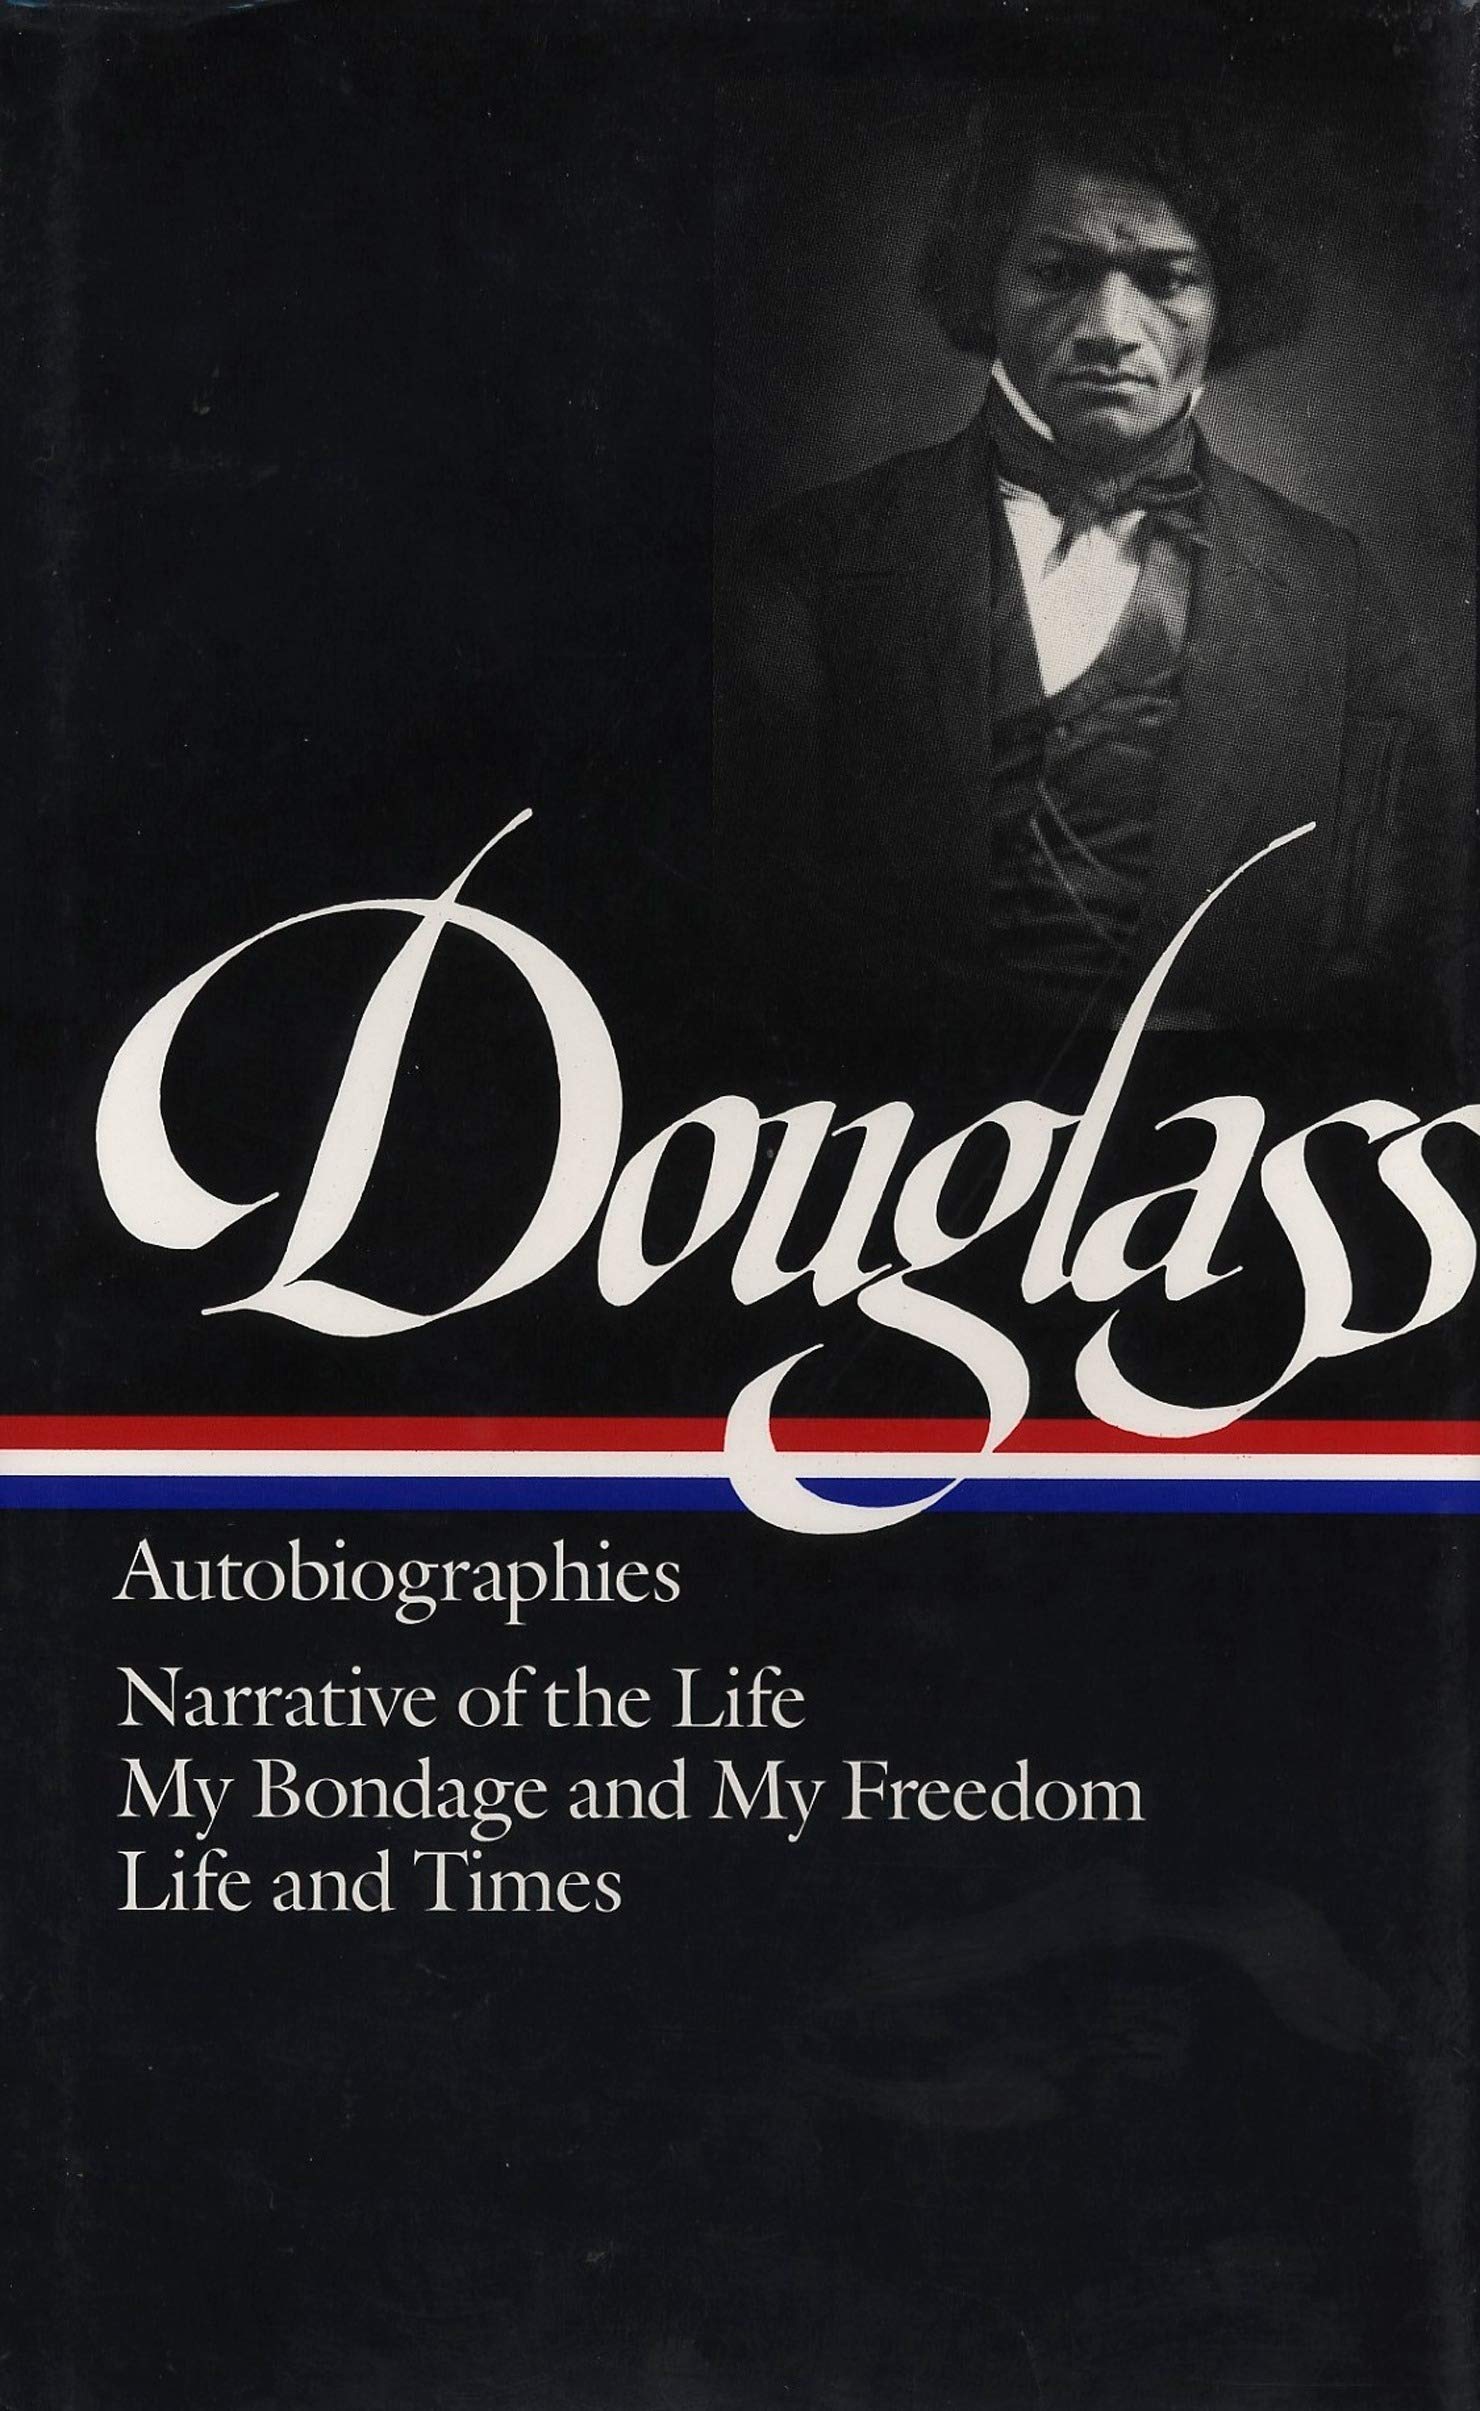 Autobiographies: Narrative of the Life of Frederick Douglass / My Bondage and My Freedom / Life and Times of Frederick Douglass